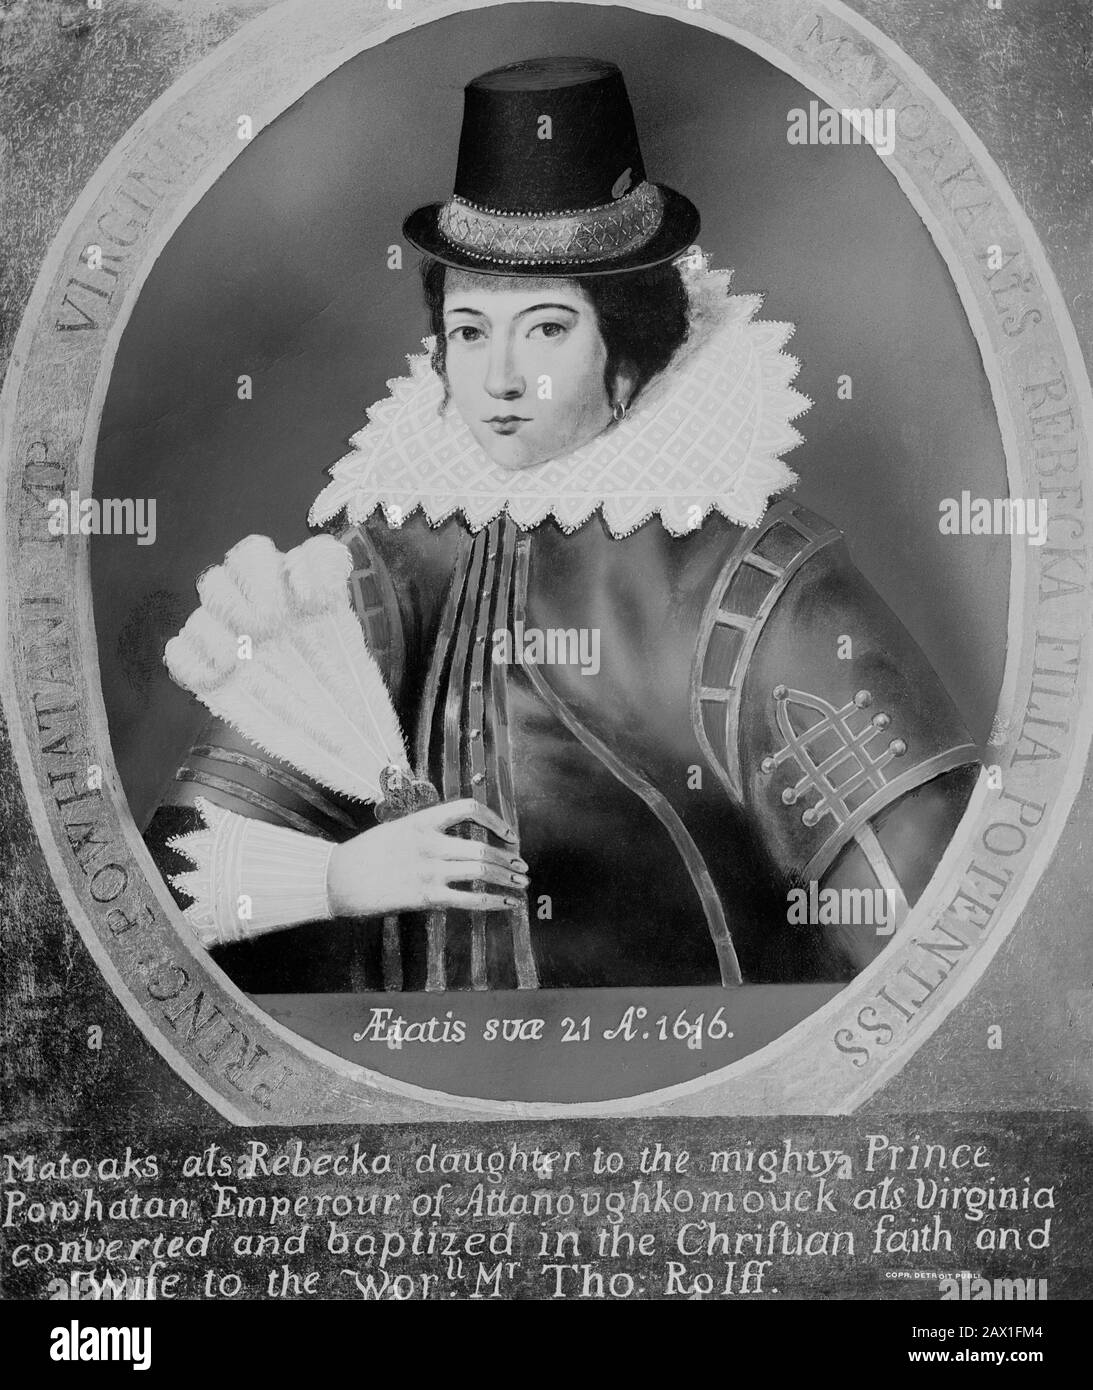 1616 , GREAT BRITAIN : Pocahontas (  1595 ca - 1617  ) as  Mrs. John Rolfe , copy by painter by William Sheppard , from original  portrait painting done in London , England , 1616 .  Pocahontas (born Matoaka, and later known as Rebecca Rolfe, c. 1595  March 1617) was a Virginia Indian . In an historical anecdote, she is said to have saved the life of an Indian captive, Englishman John Smith, in 1607 by placing her head upon his own when her father raised his war club to execute him .-  POCAHONTAS - Princess Powhatani - Epopea del Selvaggio WEST - NATIVE AMERICANS - INDIANO D' AMERICA - Indiani Stock Photo